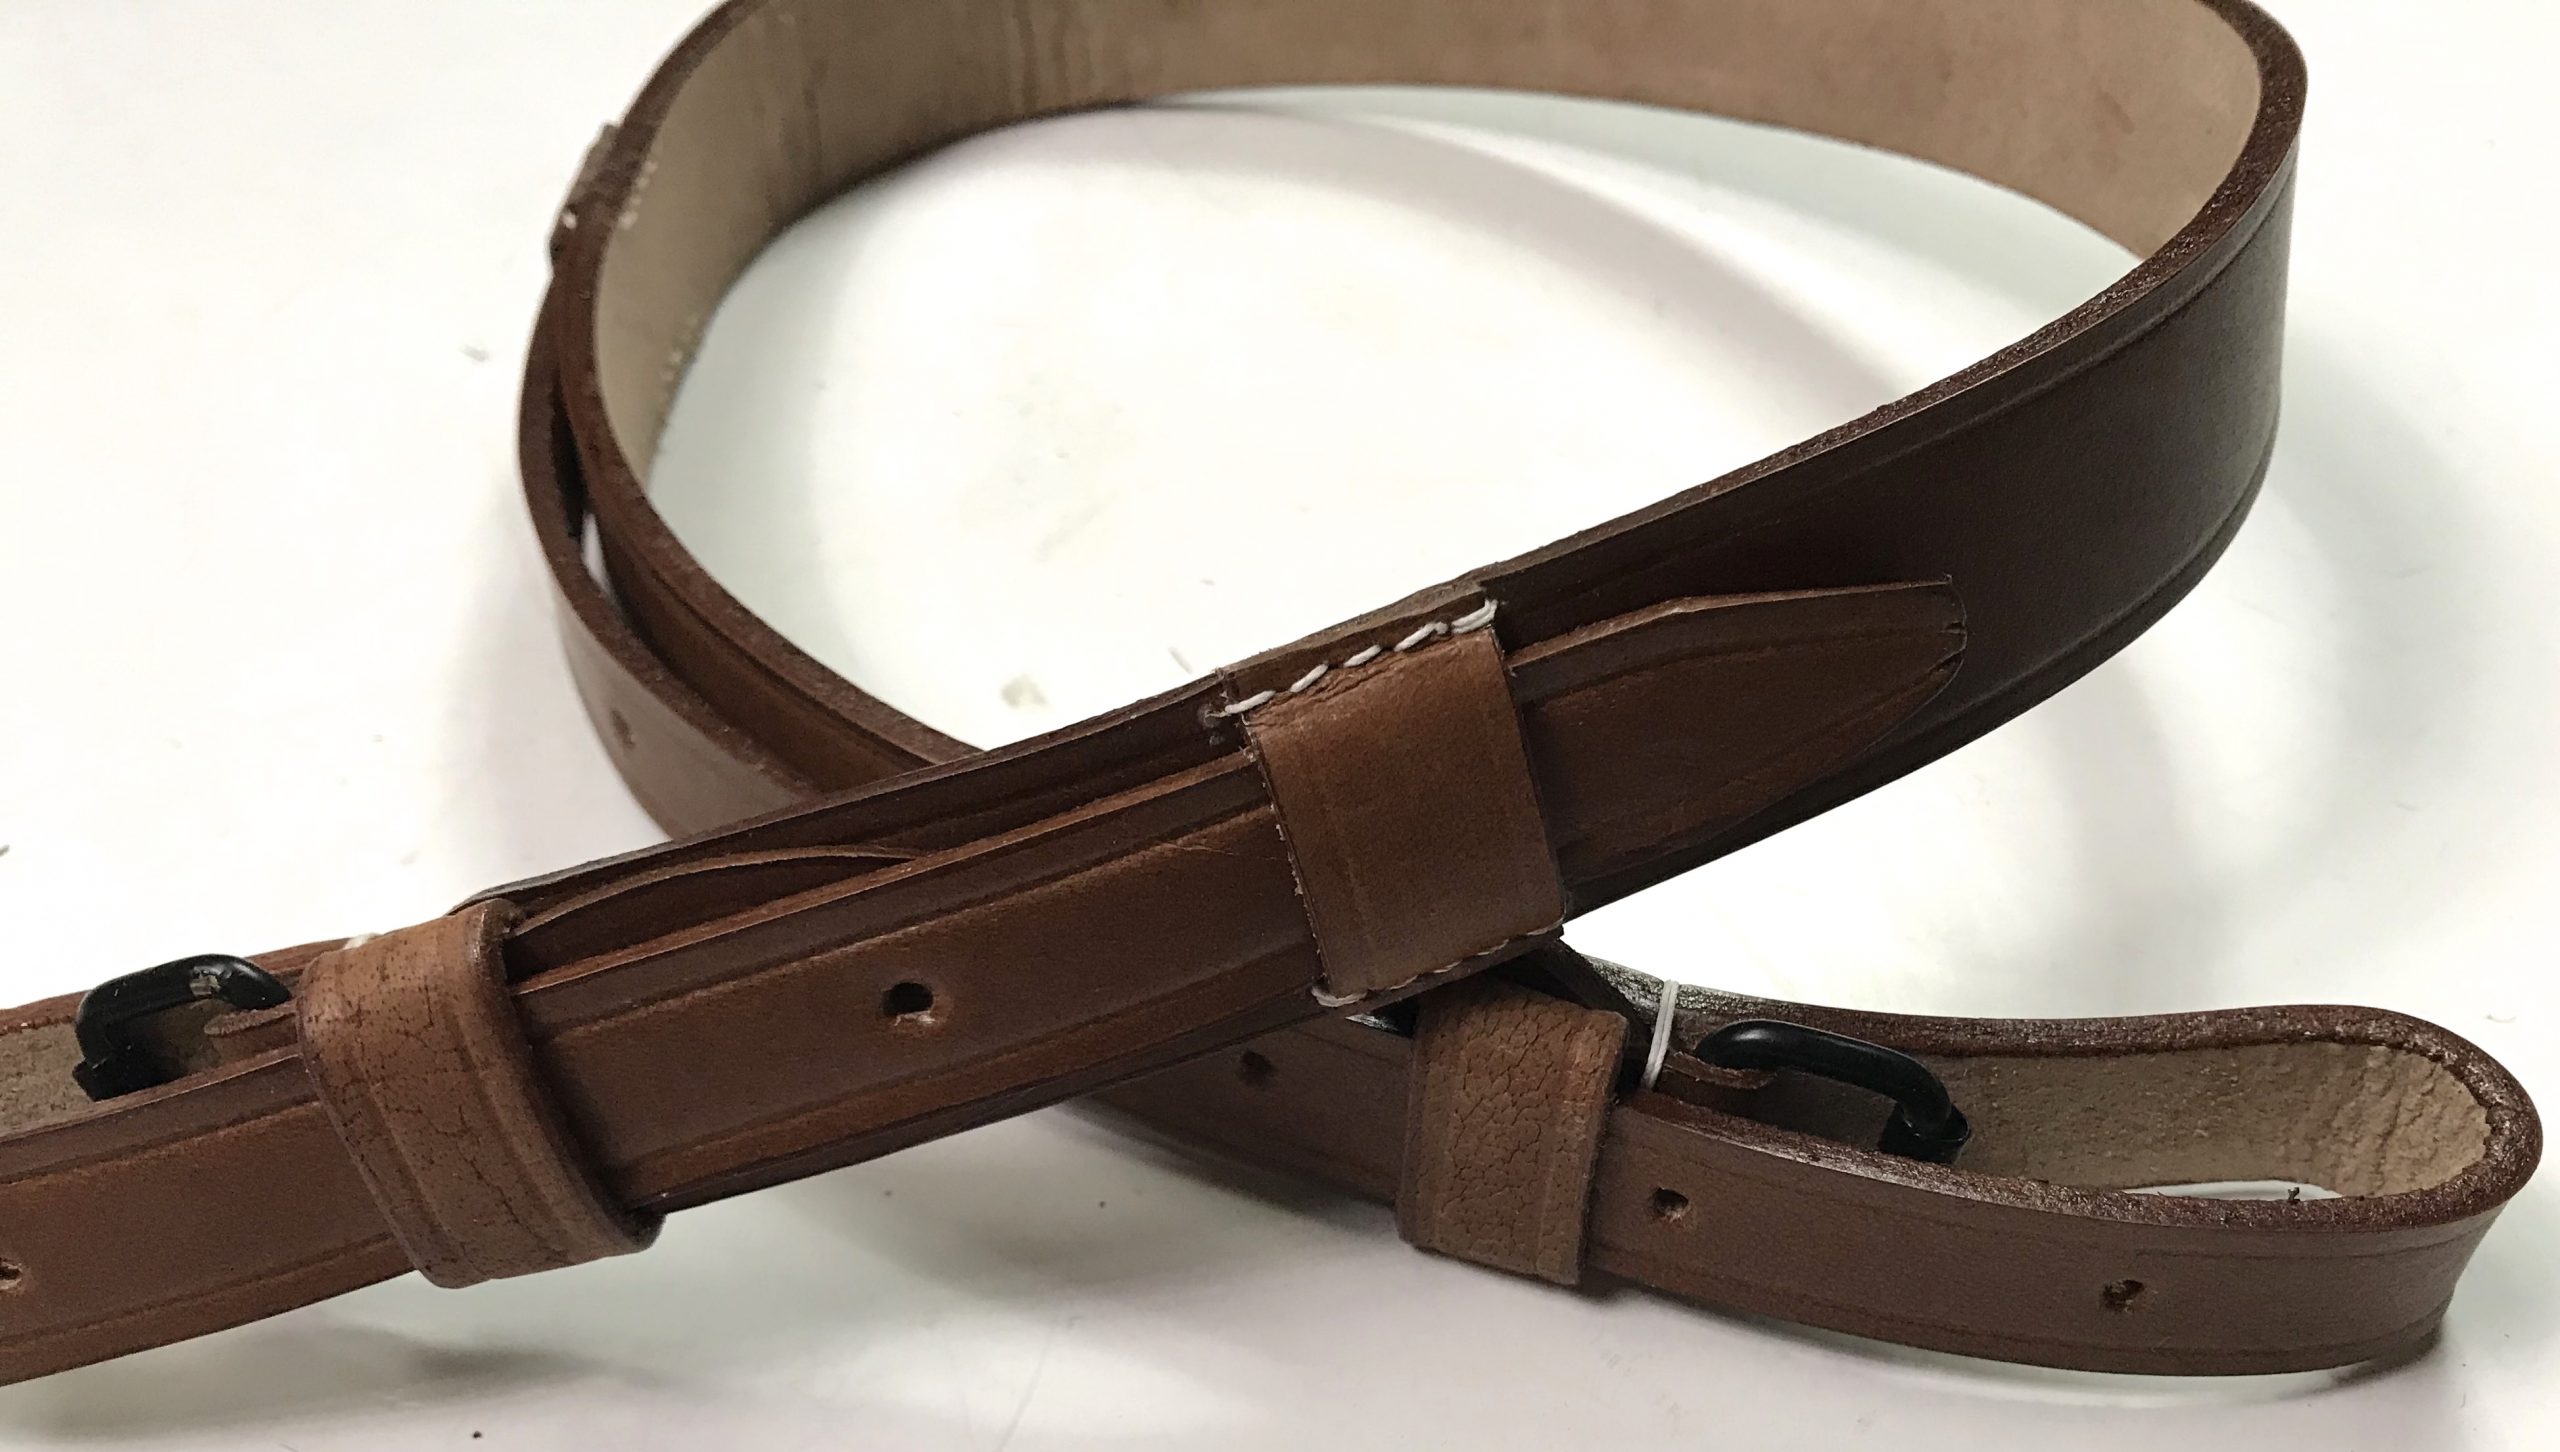 STYR M1895 M95 RIFLE LEATHER SLING | Man The Line